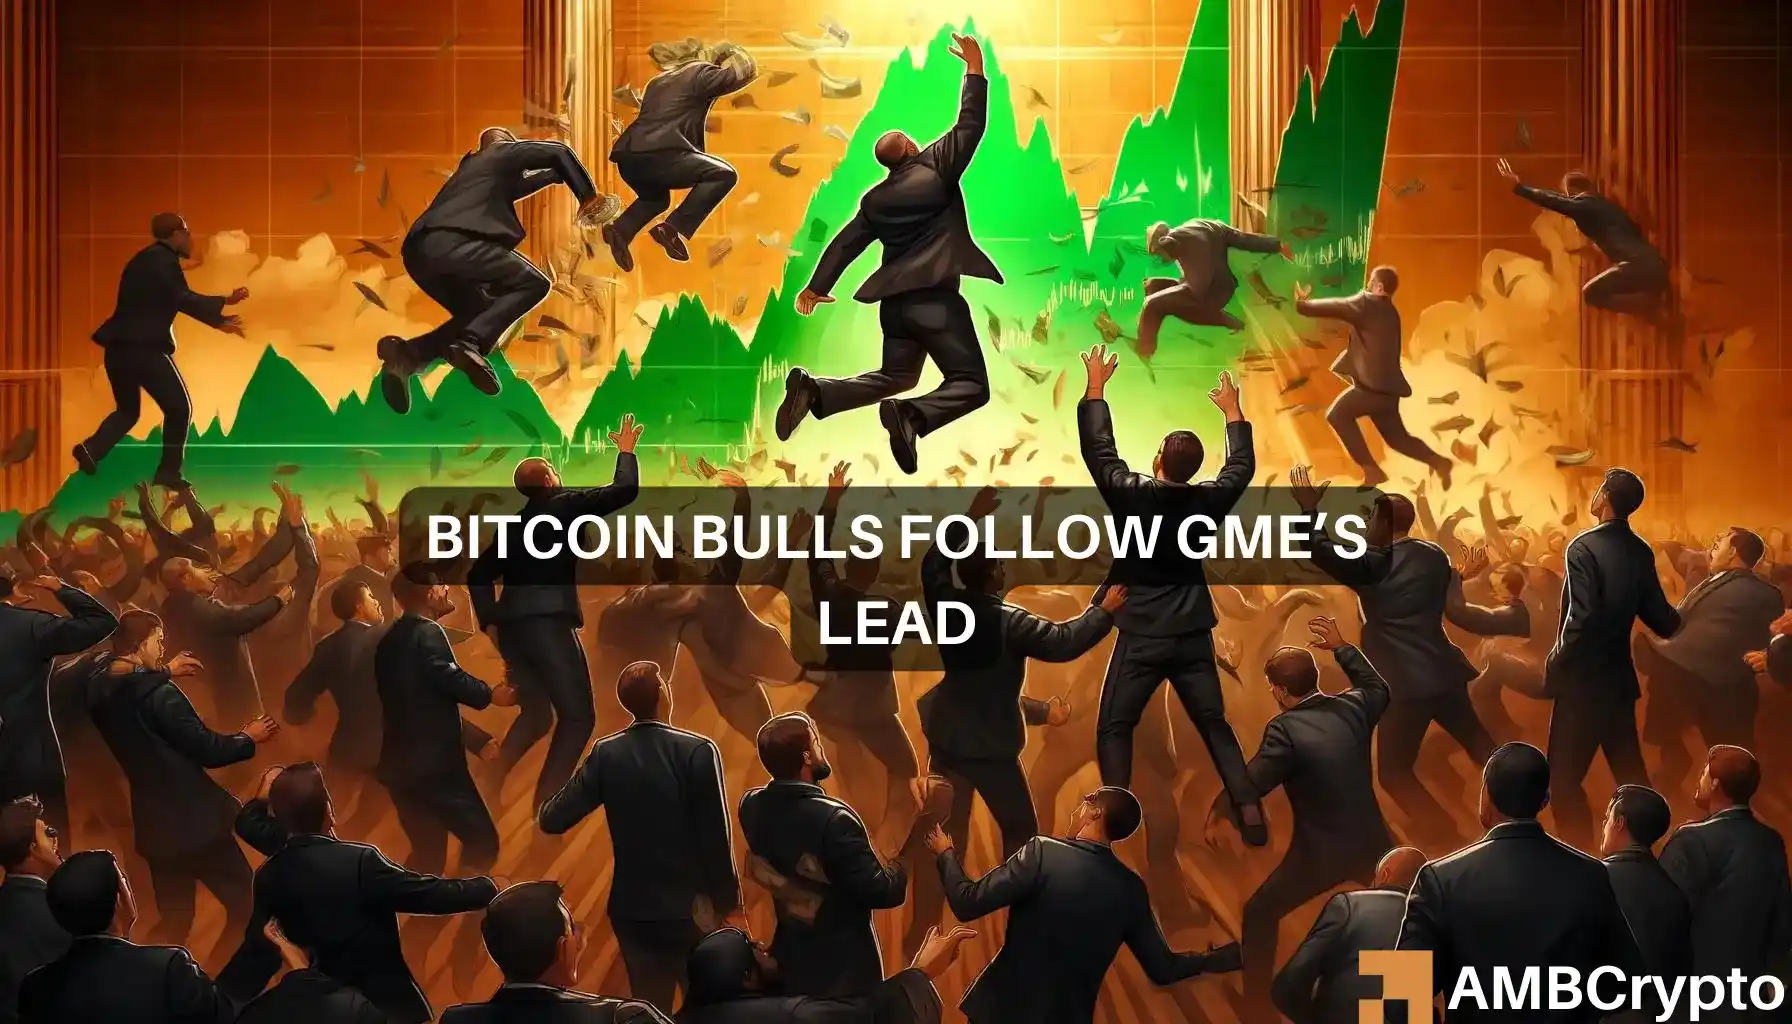 How to predict Bitcoin cycle tops using GameStop and GME's social volume